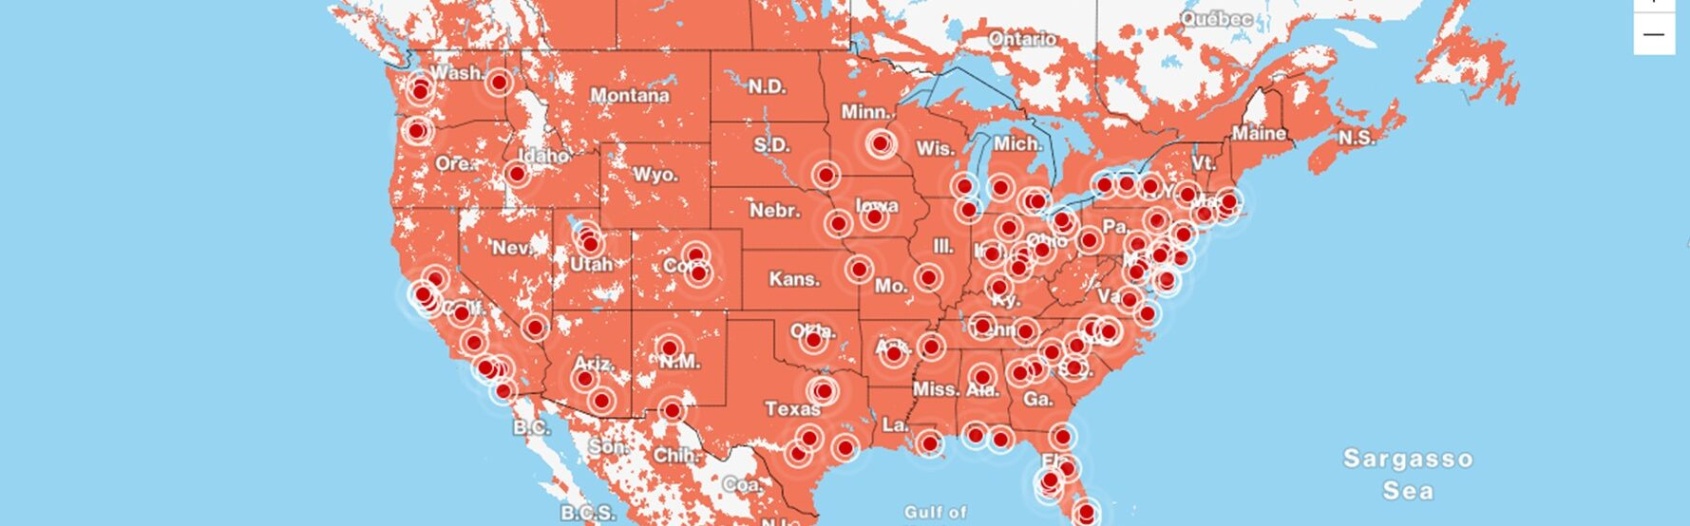 Find 5G Home Internet Coverage With Verizon: Check Out The Coverage Map!